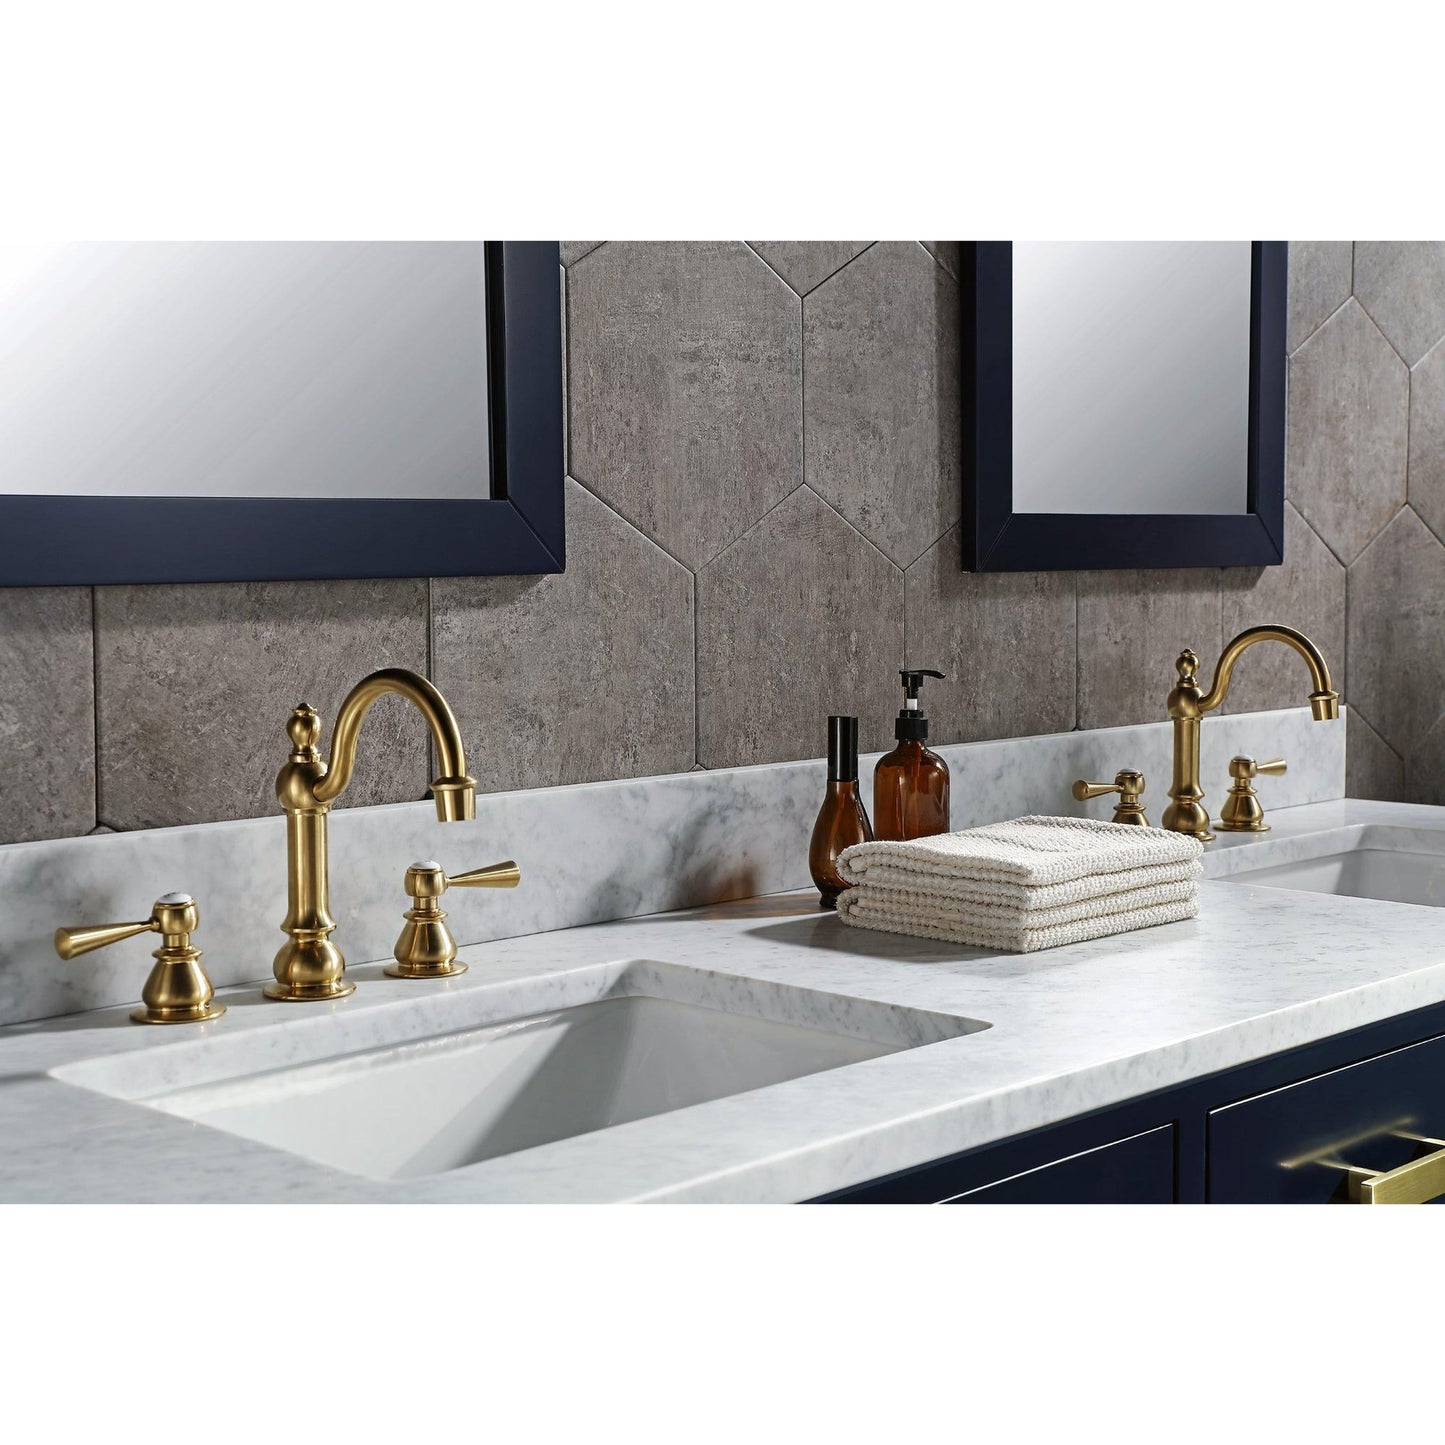 Water Creation Madison 72" Double Sink Carrara White Marble Vanity In Monarch Blue With F2-0012-06-TL Lavatory Faucet(s)